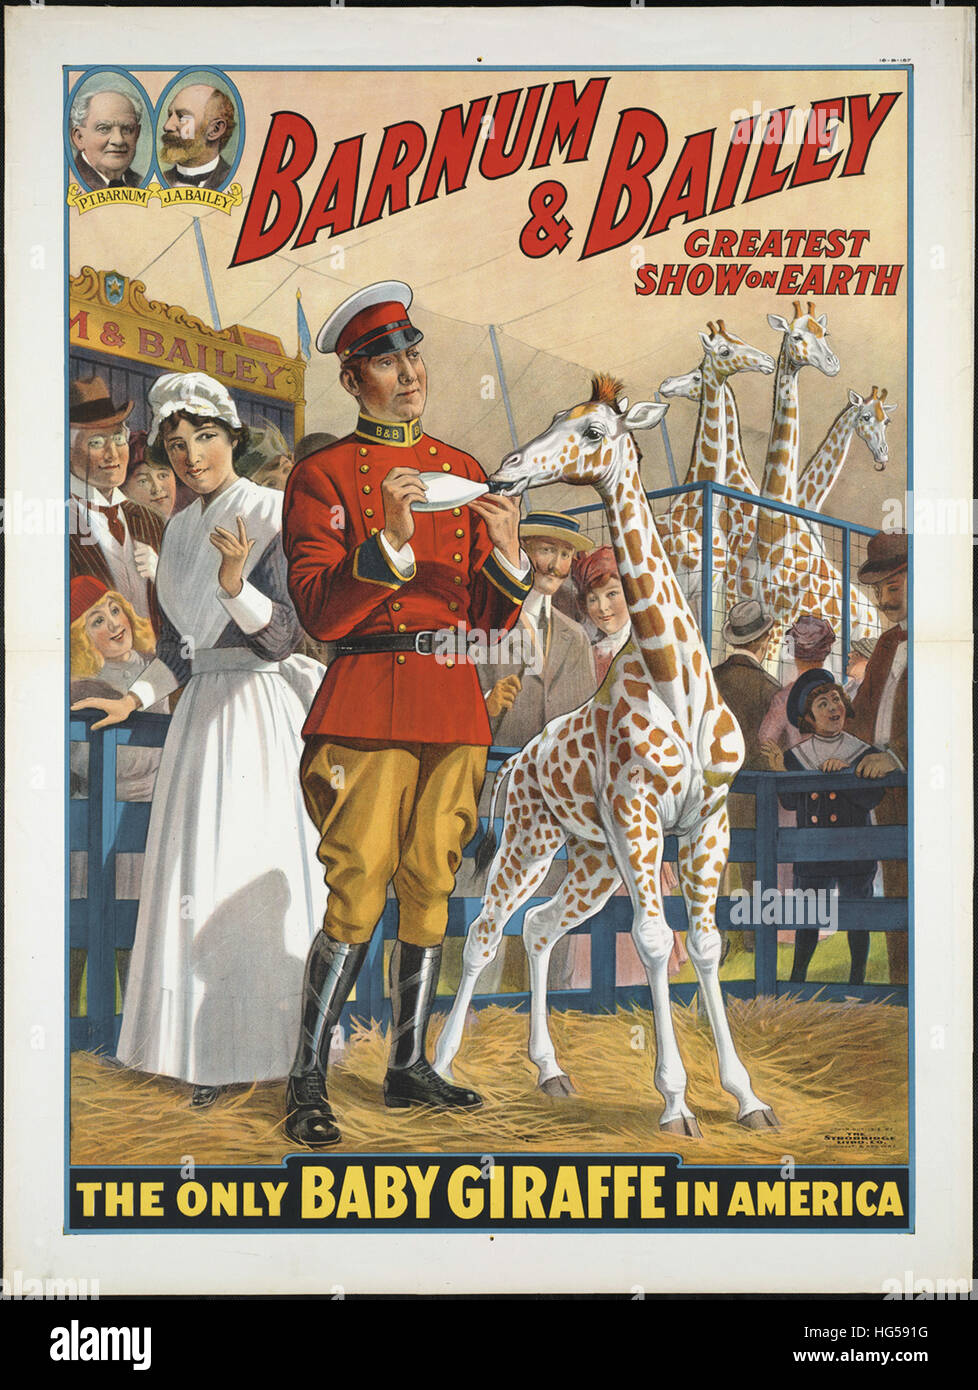 Circus Poster -  Barnum & Bailey greatest show on earth   The only baby giraffe in America Stock Photo